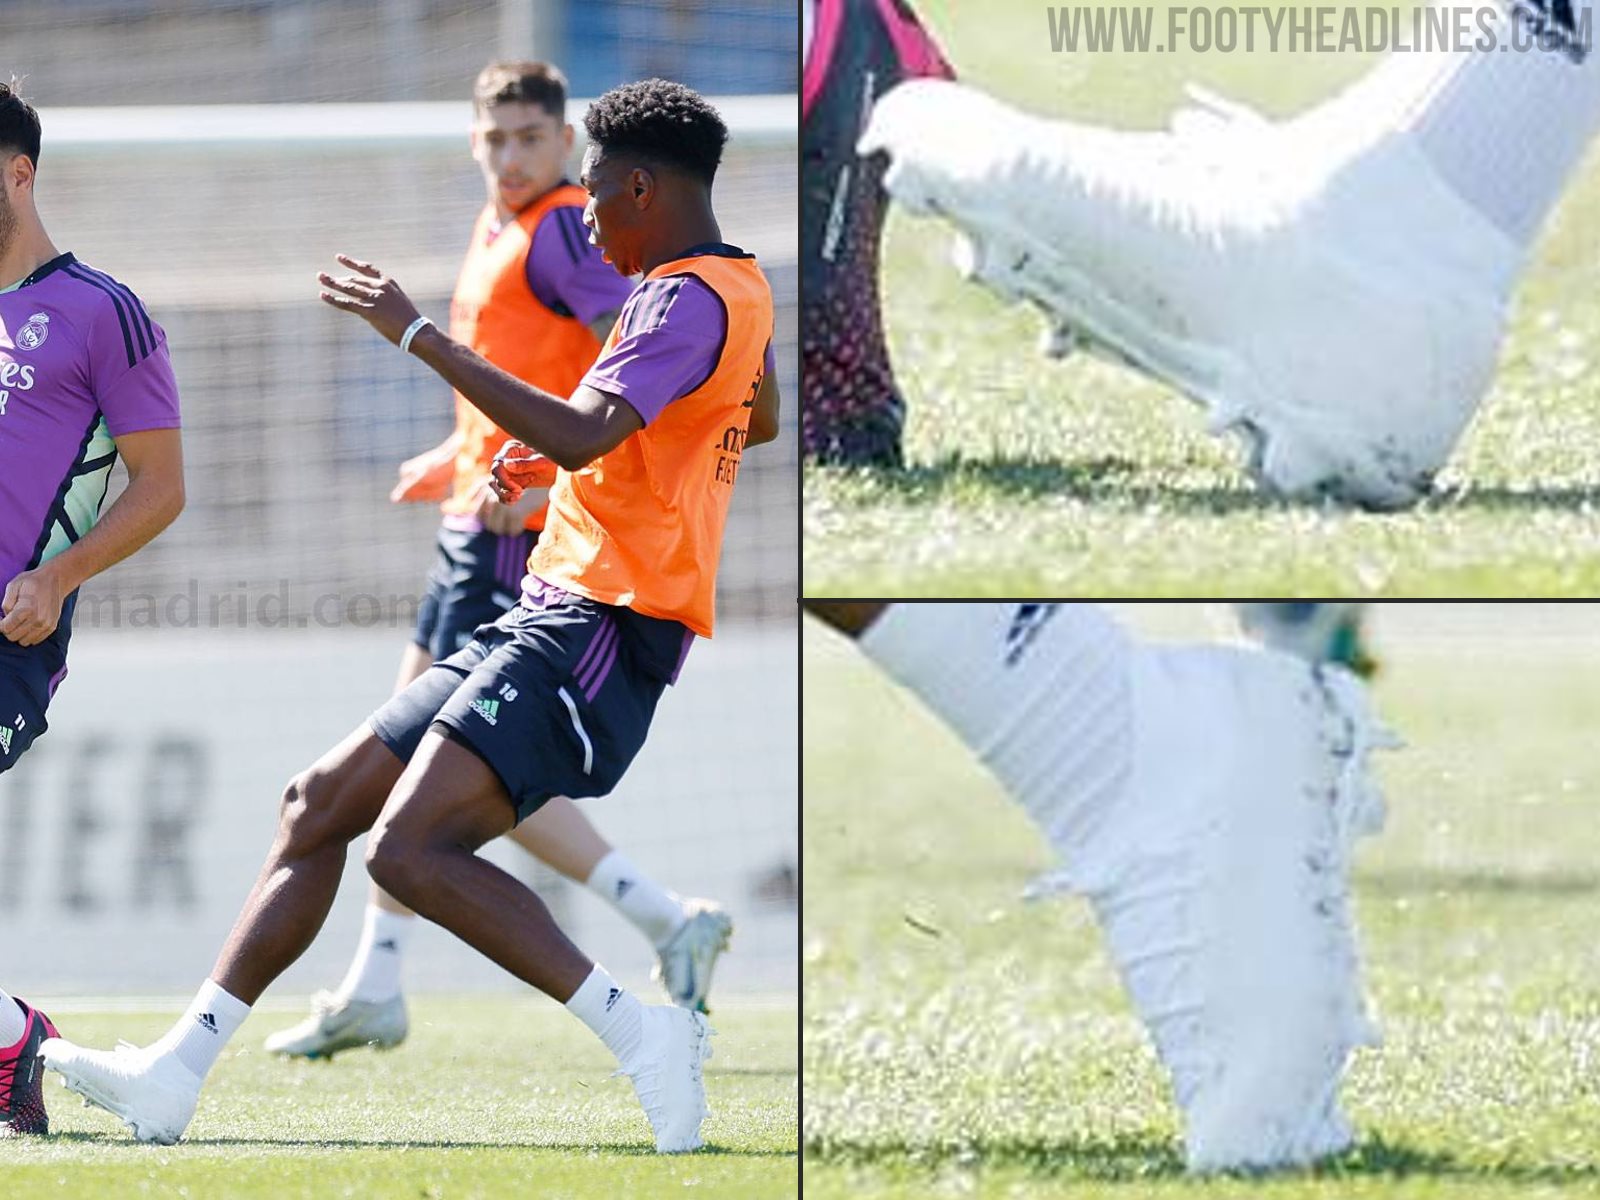 Exclusive: to Release All-New "Luna" Football Boots - Tested By Tchouameni On the Same Day as Our First Leak - Footy Headlines